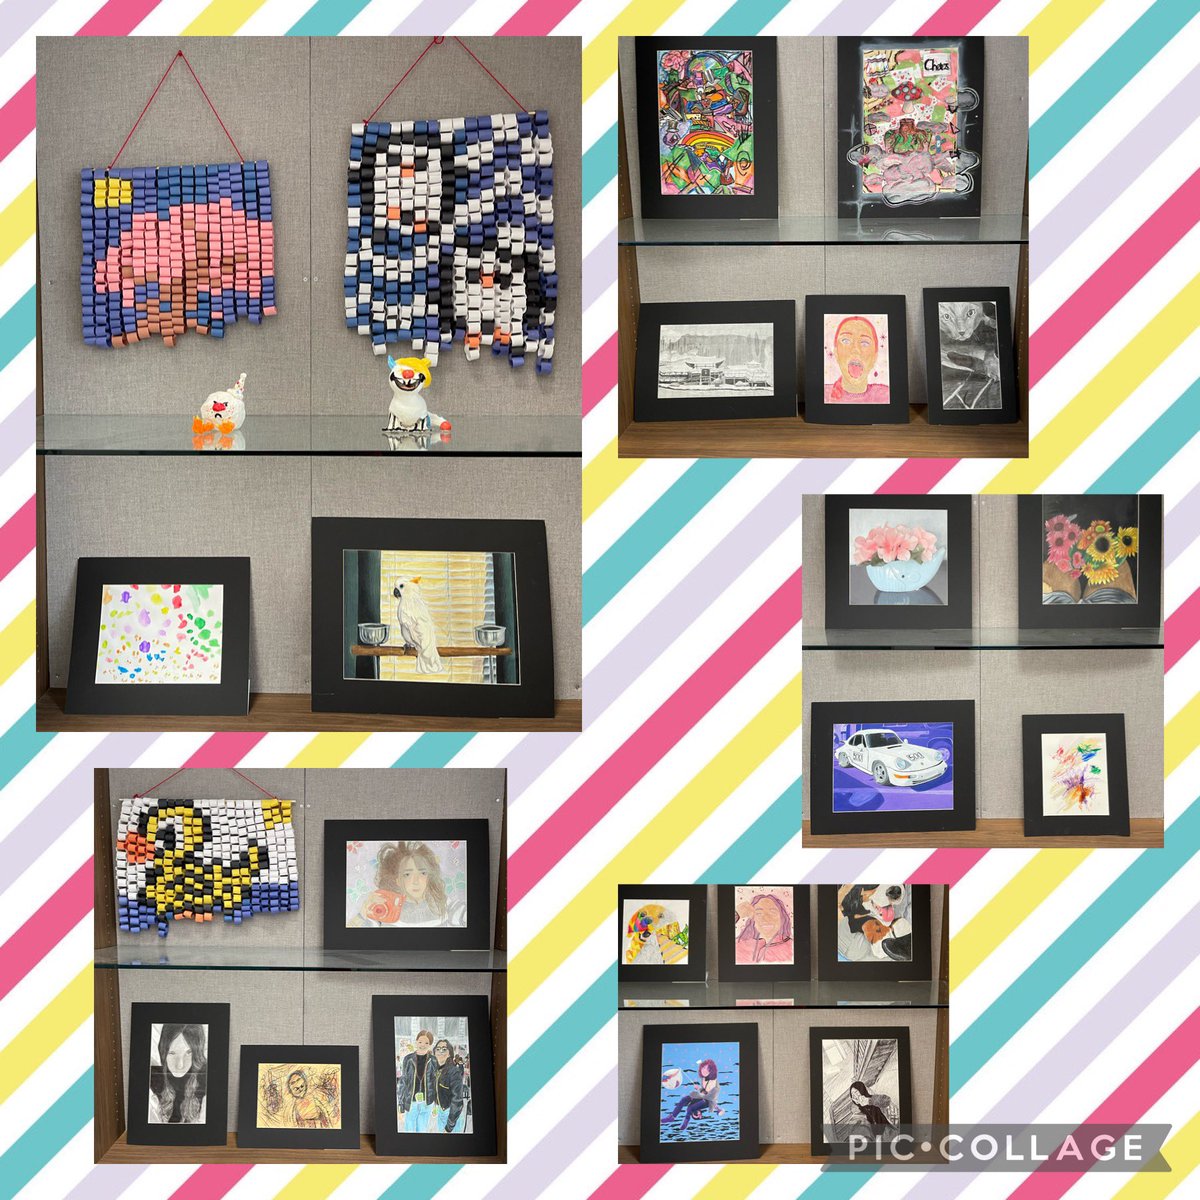 🏆 Celebrating all the amazing work created by KMS artists for the Fine Arts Festival!! Make sure to stop by the display cases to check it out.🎨 @HumbleISD_KMS @VisualArtHumble @HumbleISD_Arts #KMSCougarPride #HumbleISDArtists #wherecreativitystARTS @ladyFern12